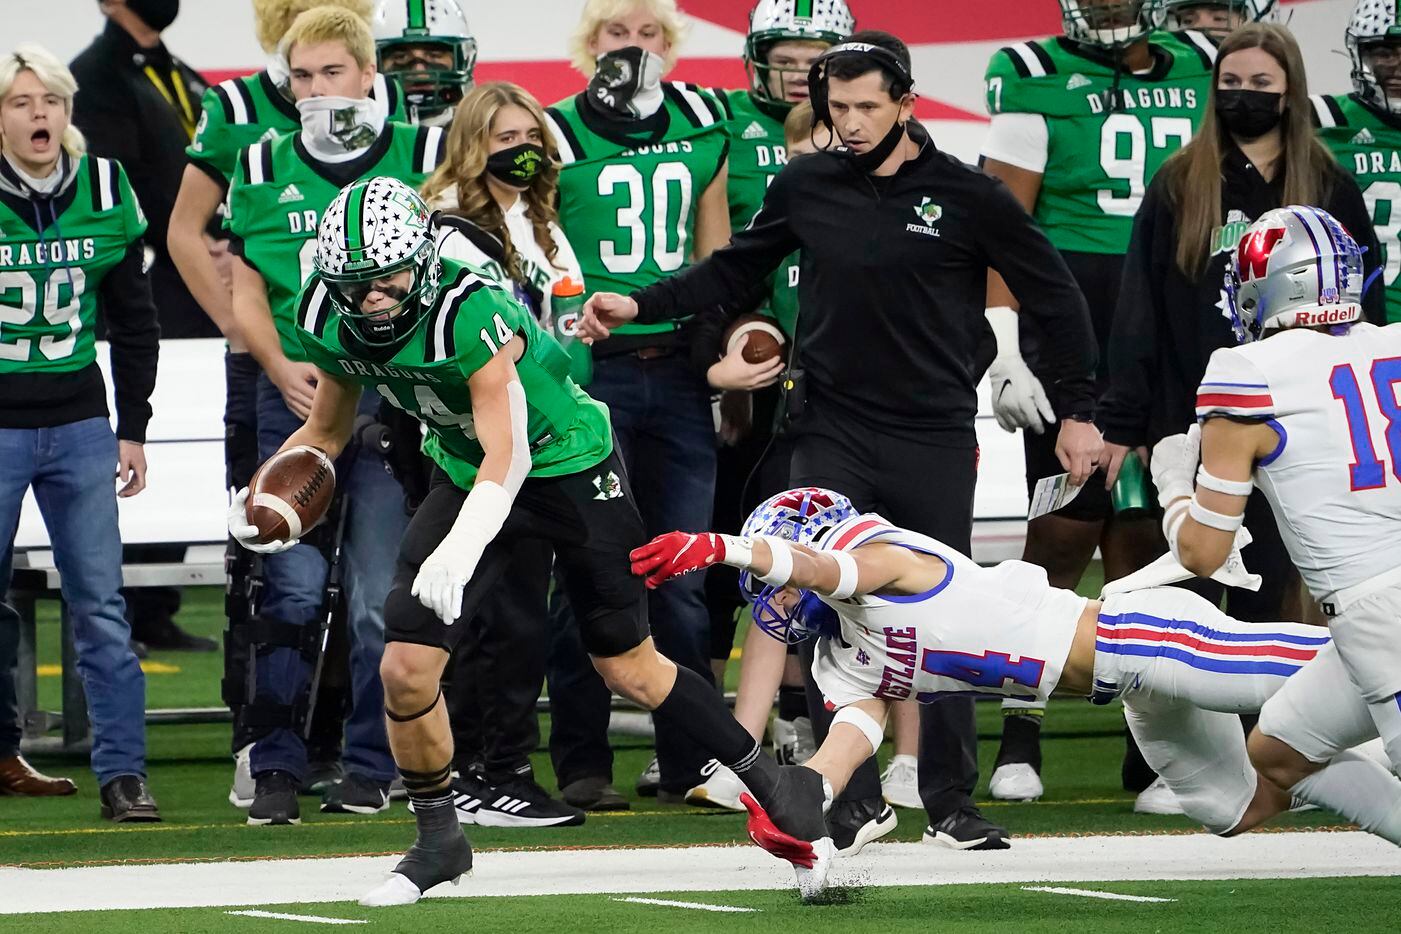 Southlake Carroll wide receiver Brady Boyd (14) is knocked out of bounds by Austin Westlake defensive back Michael Taaffe in front of Southlake Carroll head coach Riley Dodge during the first quarter of the Class 6A Division I state football championship game at AT&T Stadium on Saturday, Jan. 16, 2021, in Arlington, Texas. (Smiley N. Pool/The Dallas Morning News)